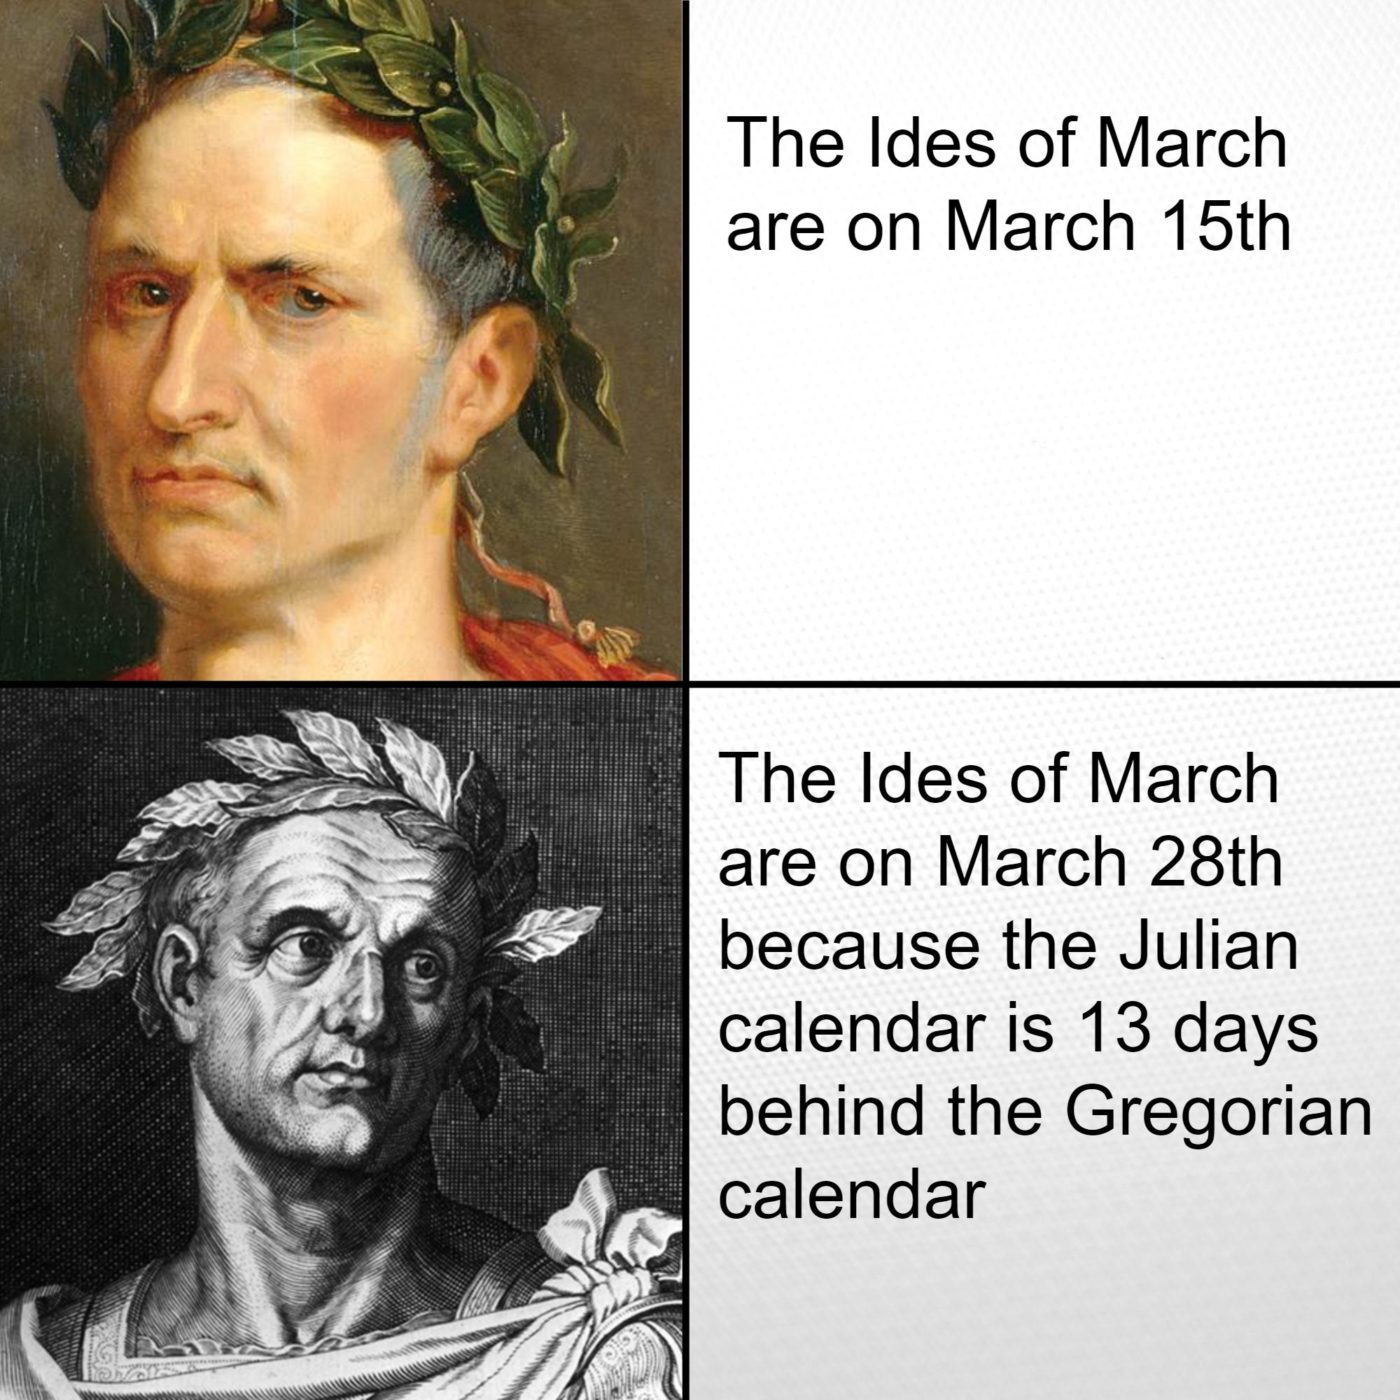 Ides of March with 2 photo of Julius Caesar and difference in the date between Julian and Gregorian calendars